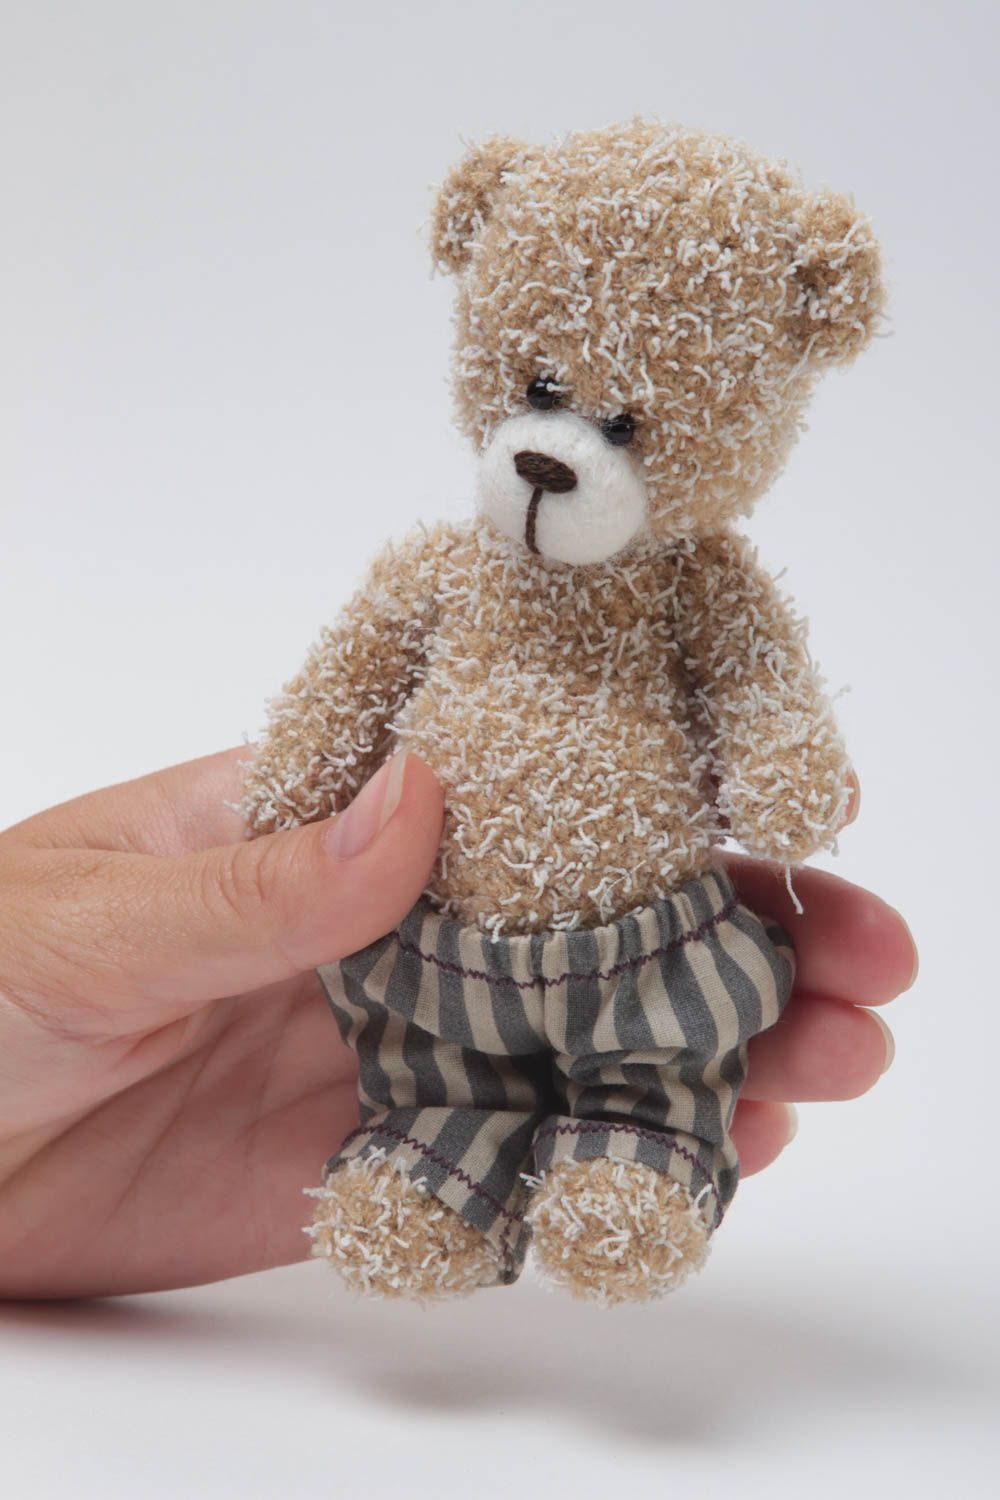 Handmade toy designer toy bear toy unusual gift decor ideas gift for baby photo 5